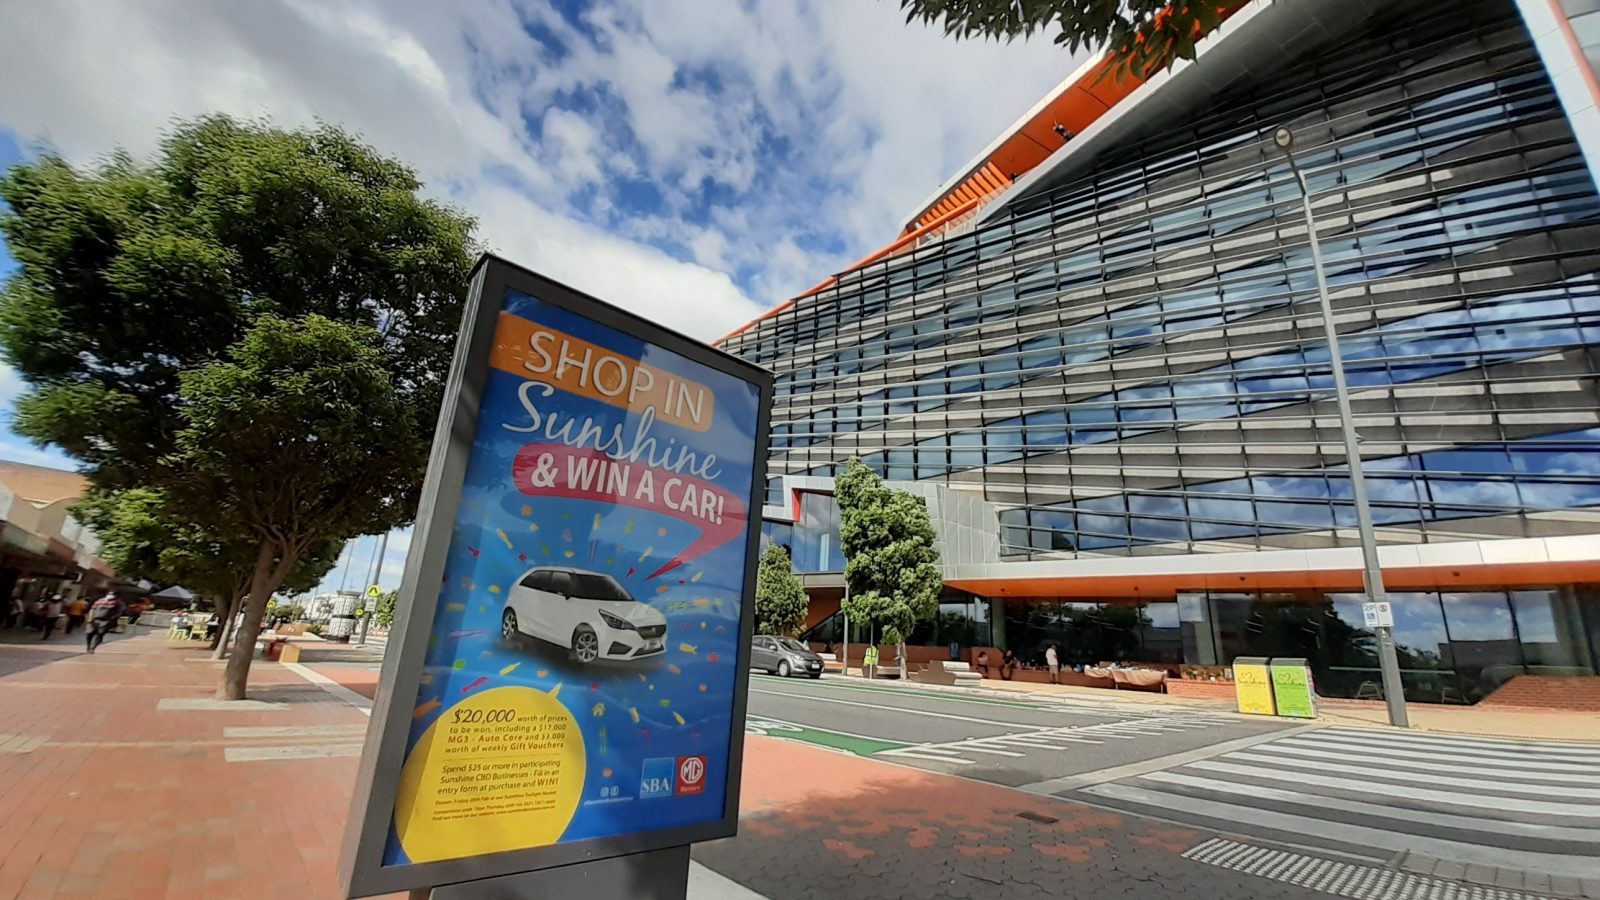 Photo of an Advertising board in the main street of Sunshine with the Council office building in the background